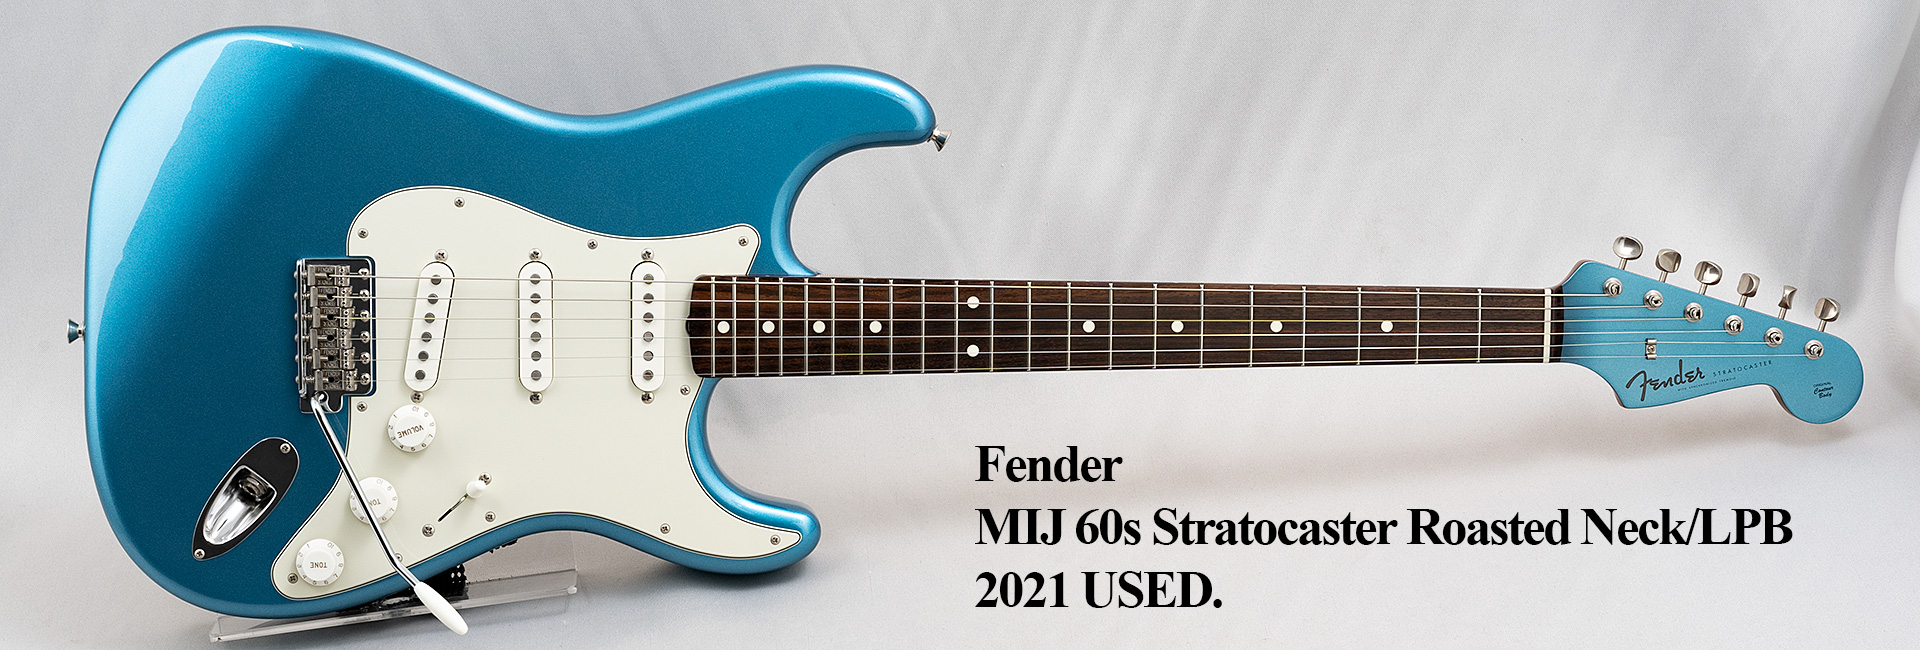 Fender Made in Japan 60s Stratocaster Roasted Neck/LPB.【リアルスタンダードWEB】